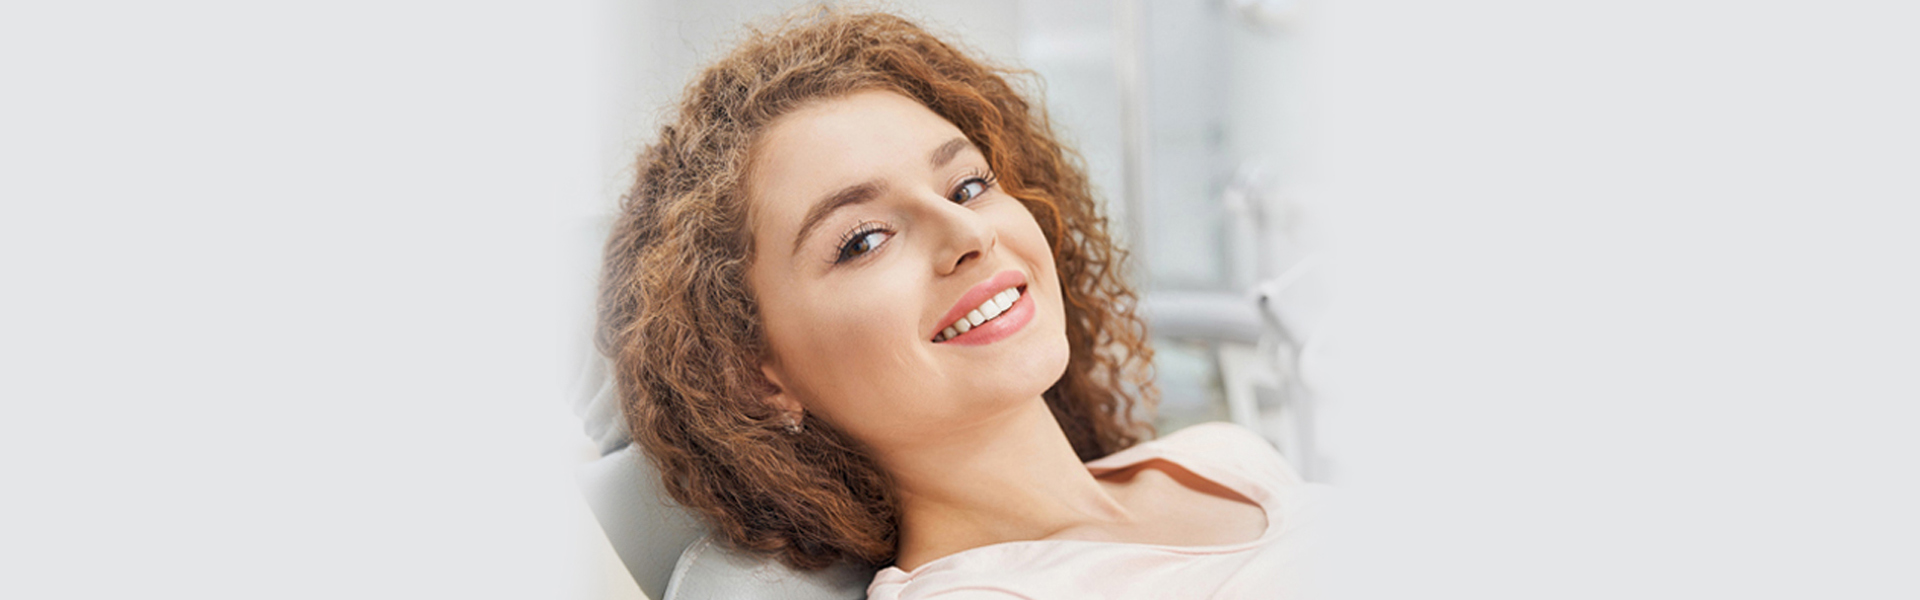 Common Thoughts Post Dental Filling: Navigating the Riverdale Dental Experience